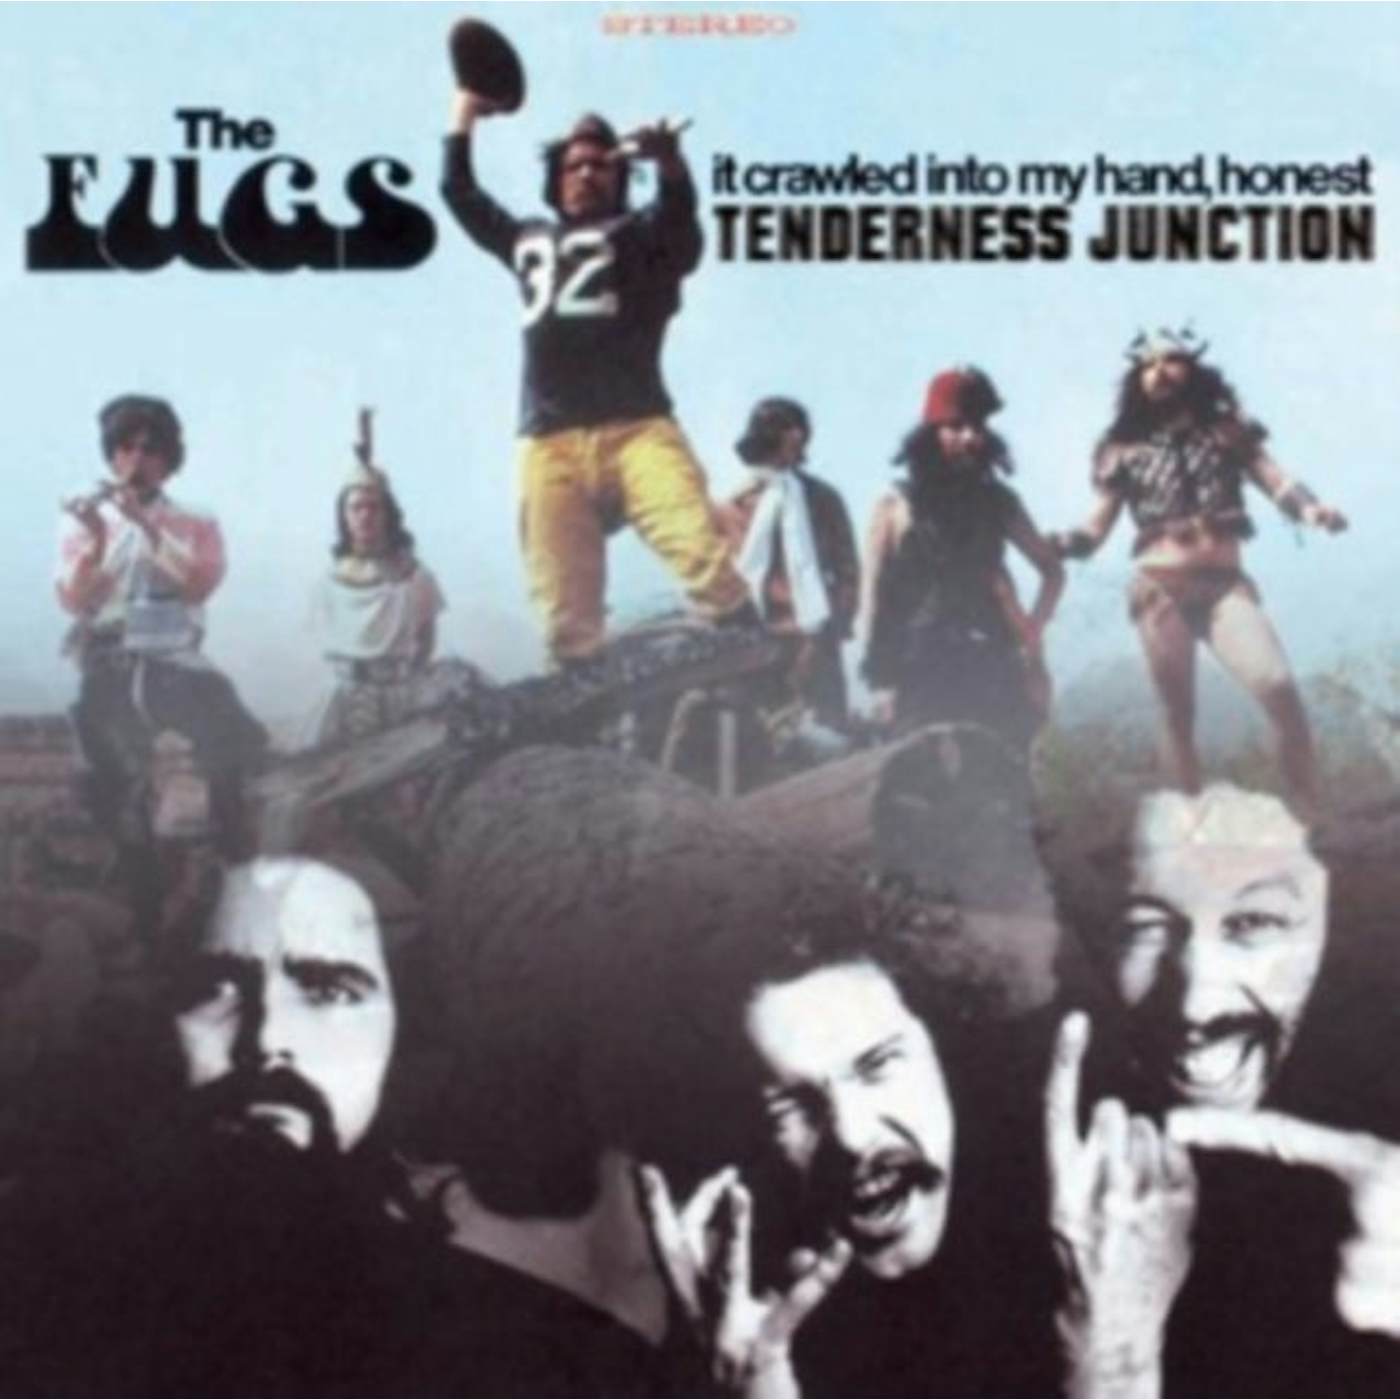 The Fugs CD - Tenderness Junction C/W It Crawled